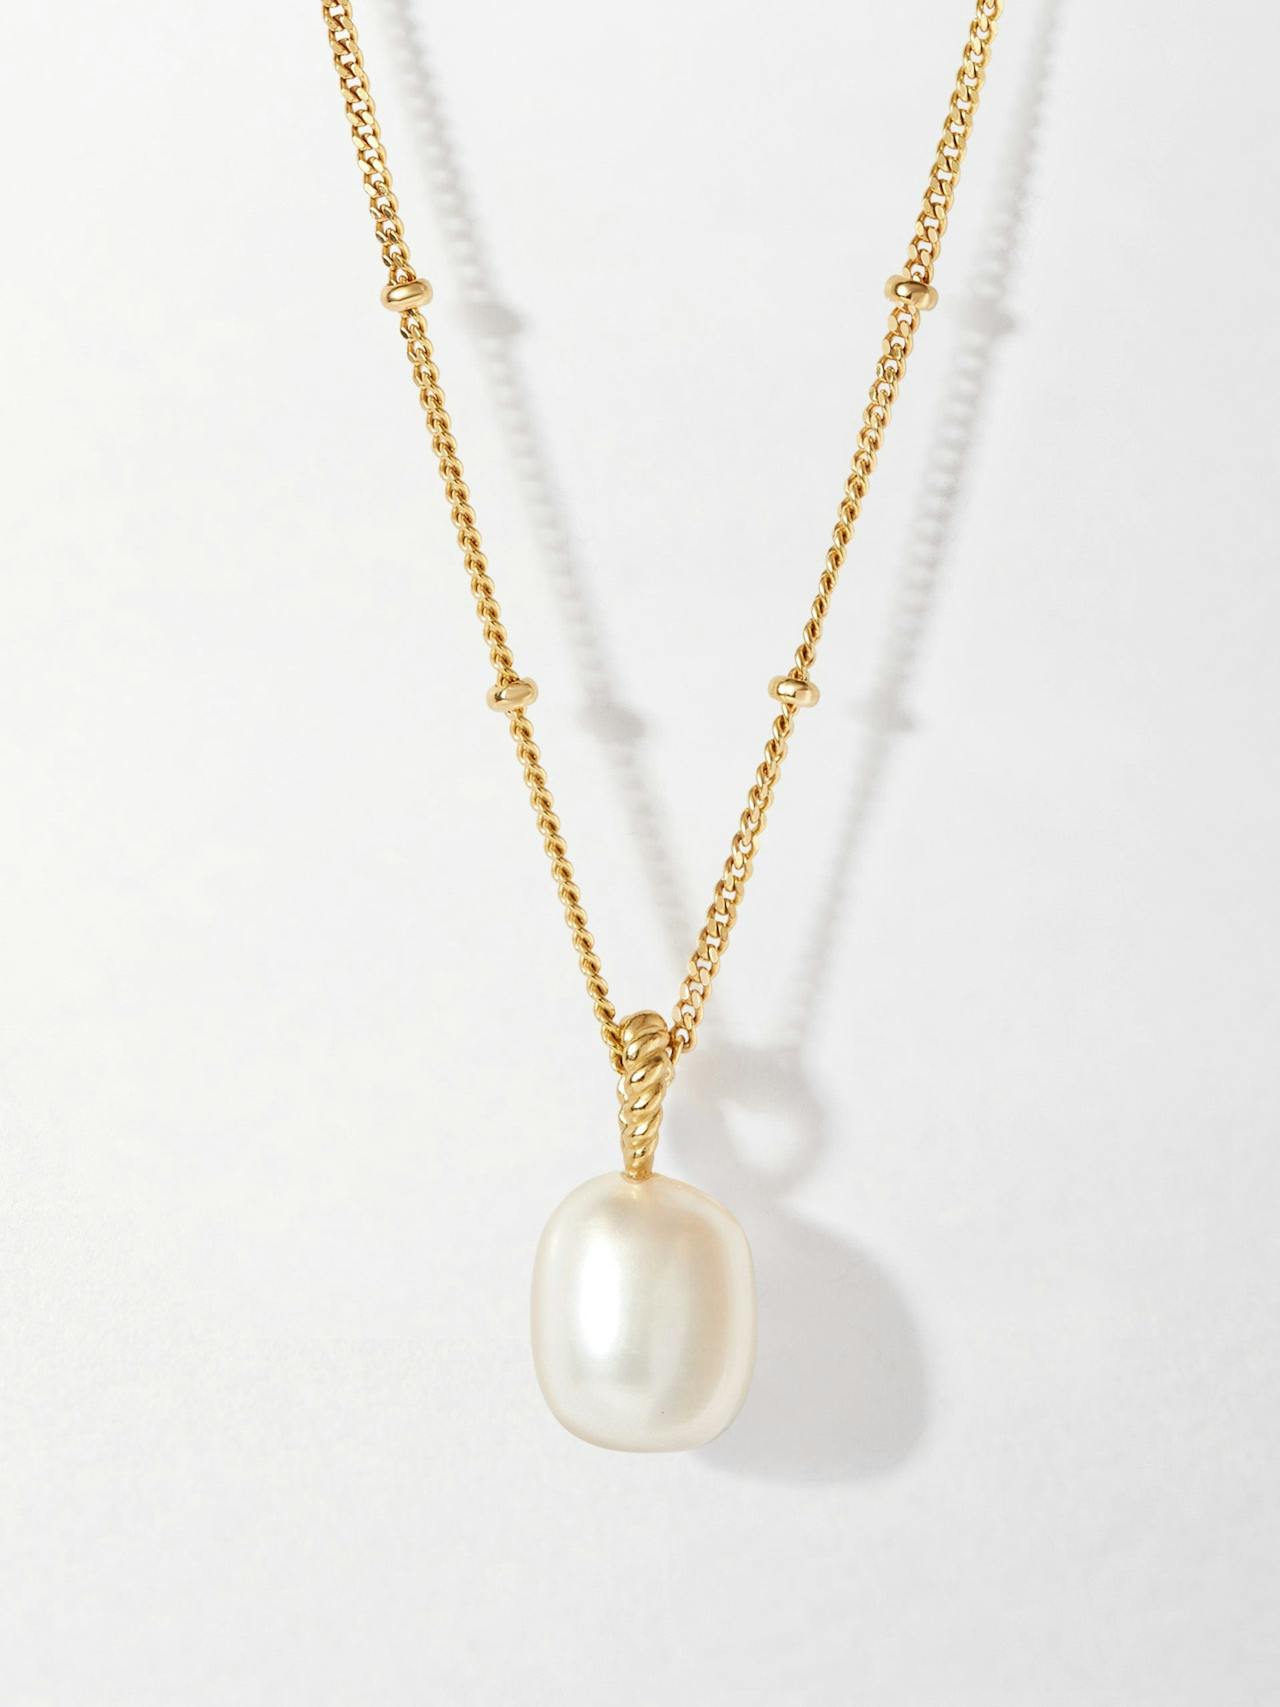 Marine pearl necklace